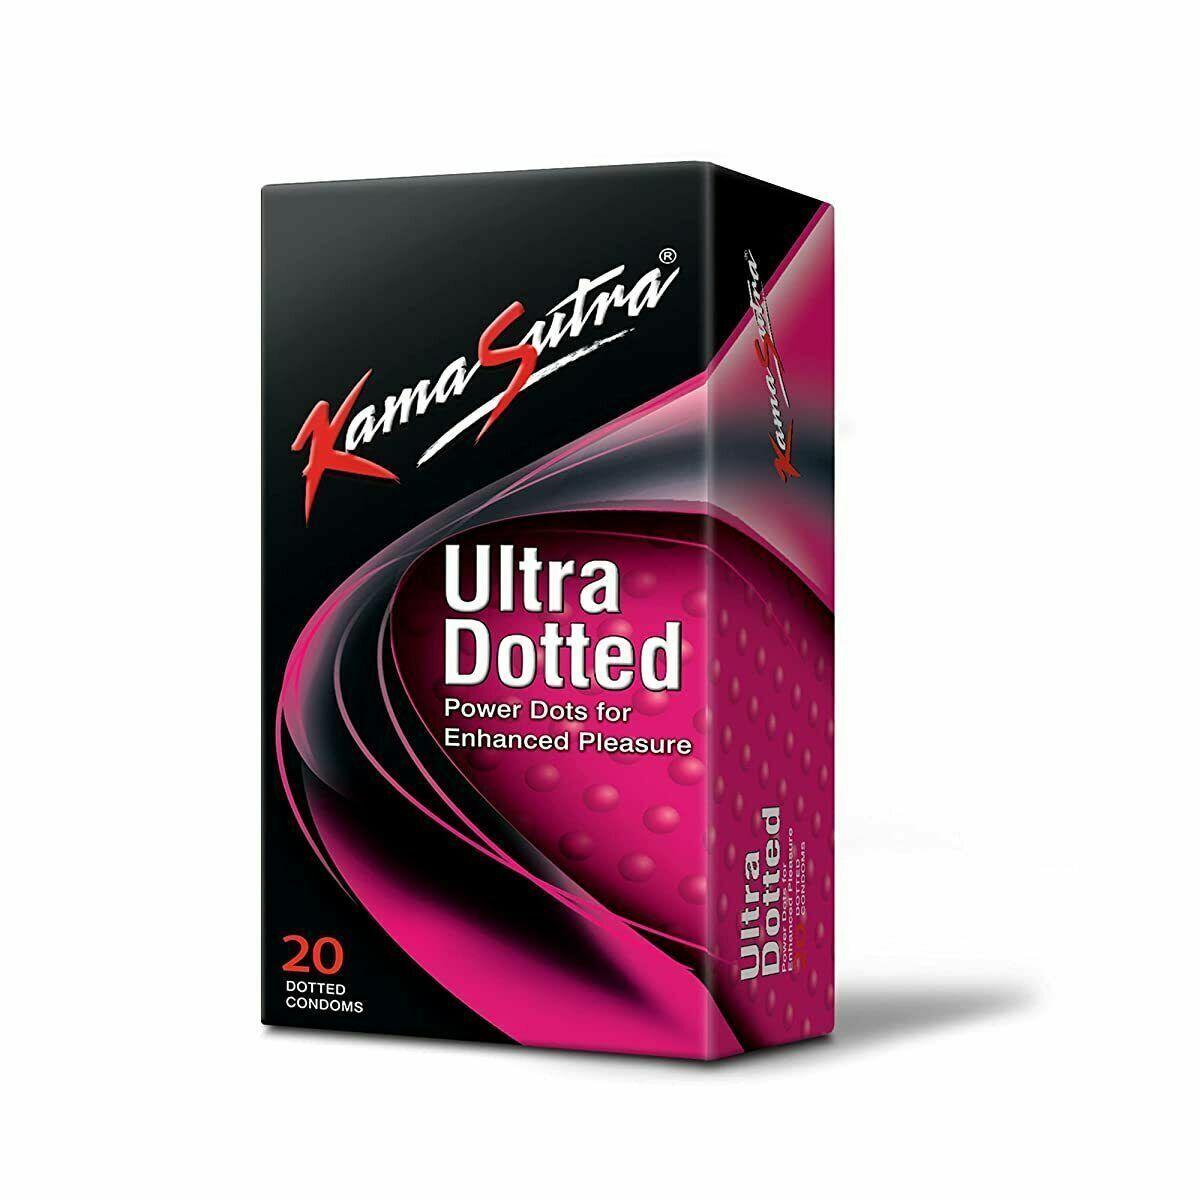 KamaSutra Ultra Dotted Condoms - 20 Count (Pack of 1)